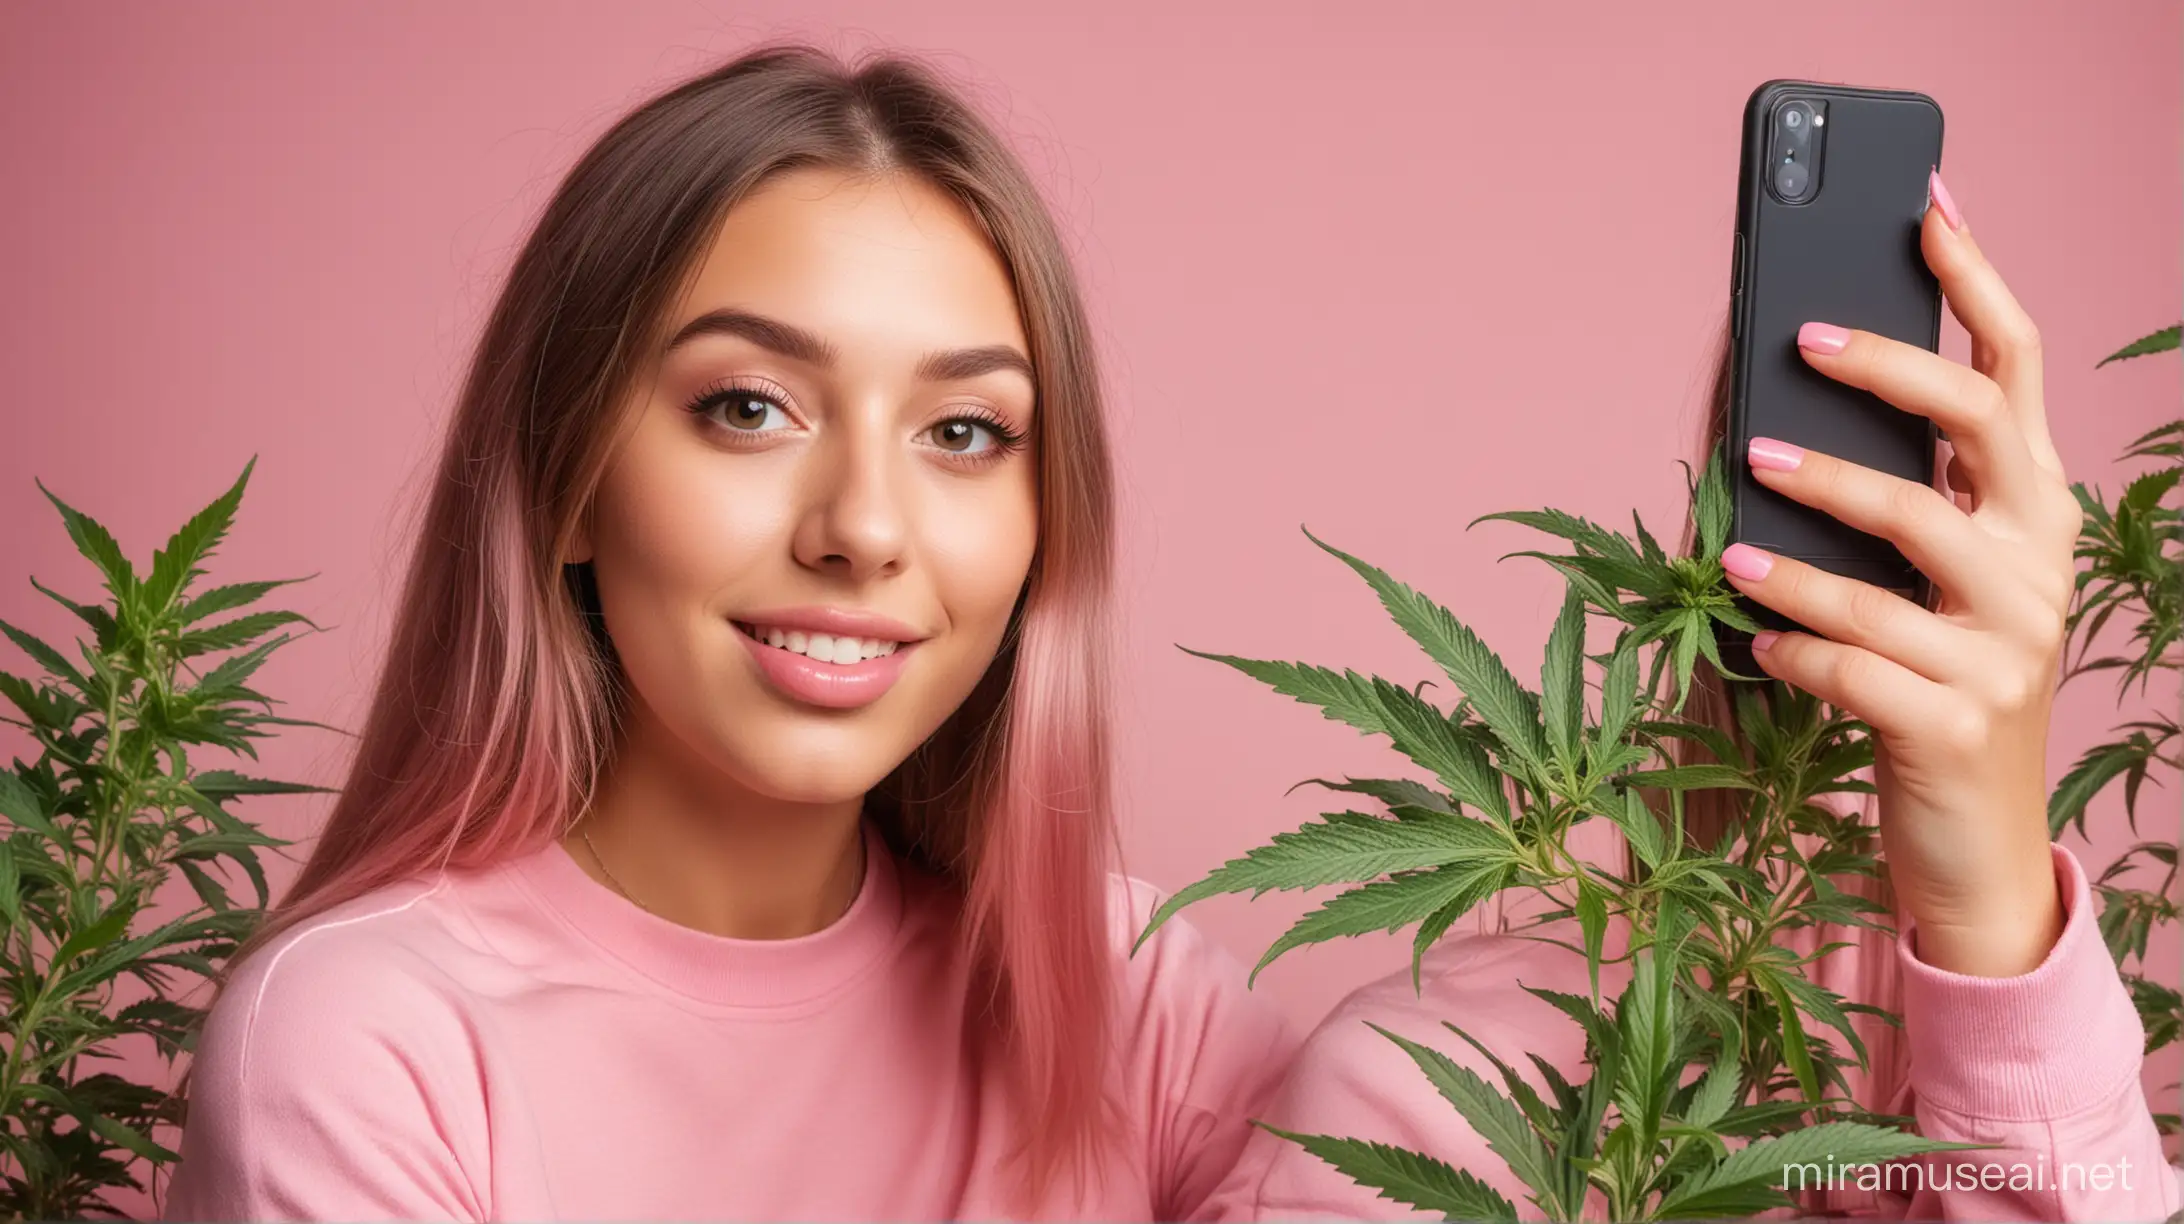 Girl Taking a Selfie with Cannabis Plant in Bubblegum Pink and Green